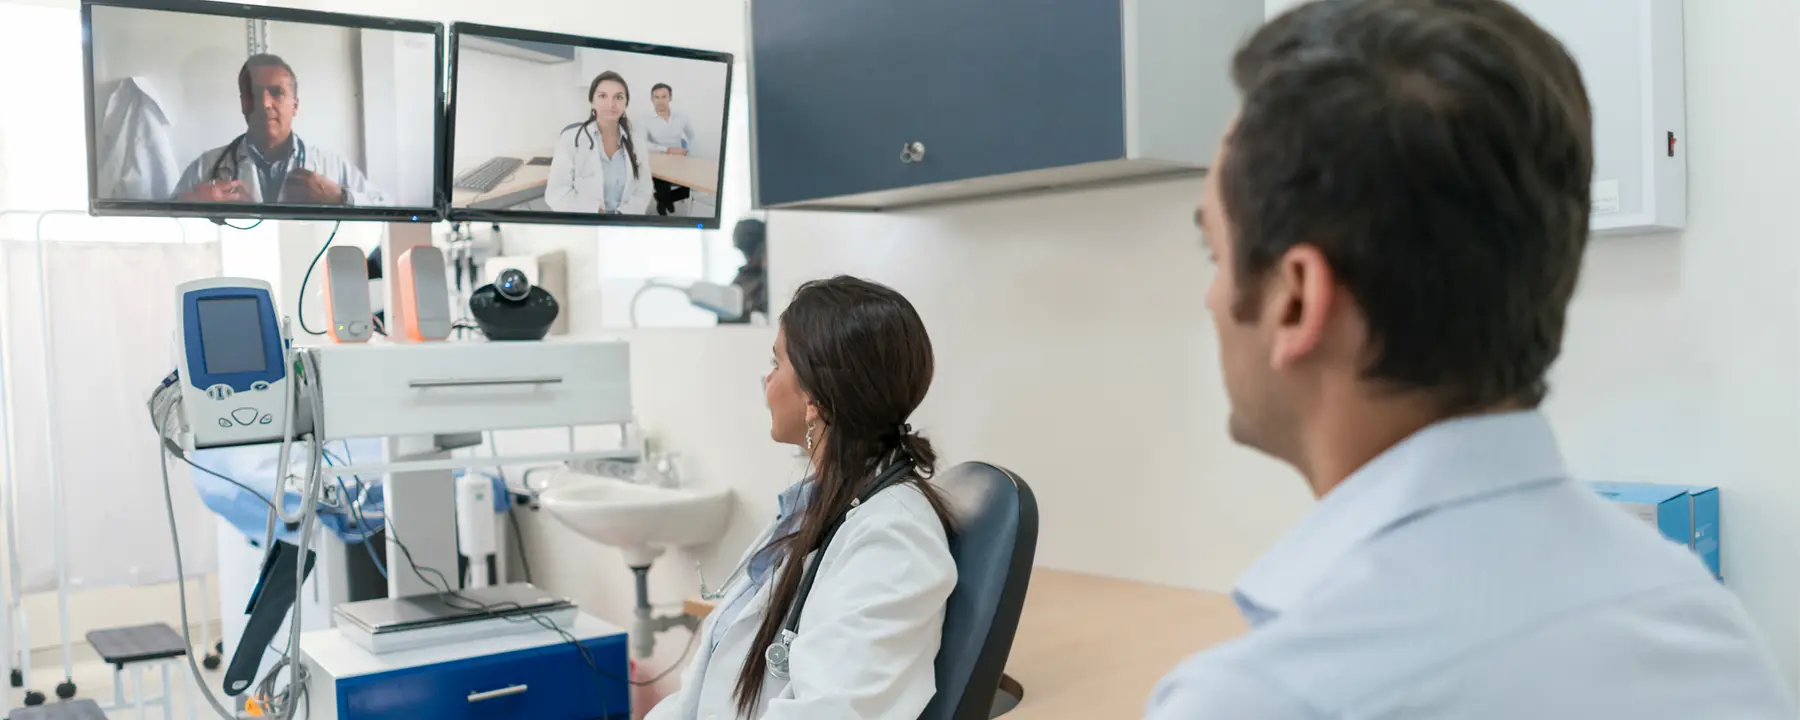 Doctors consult with one another via teleconference.